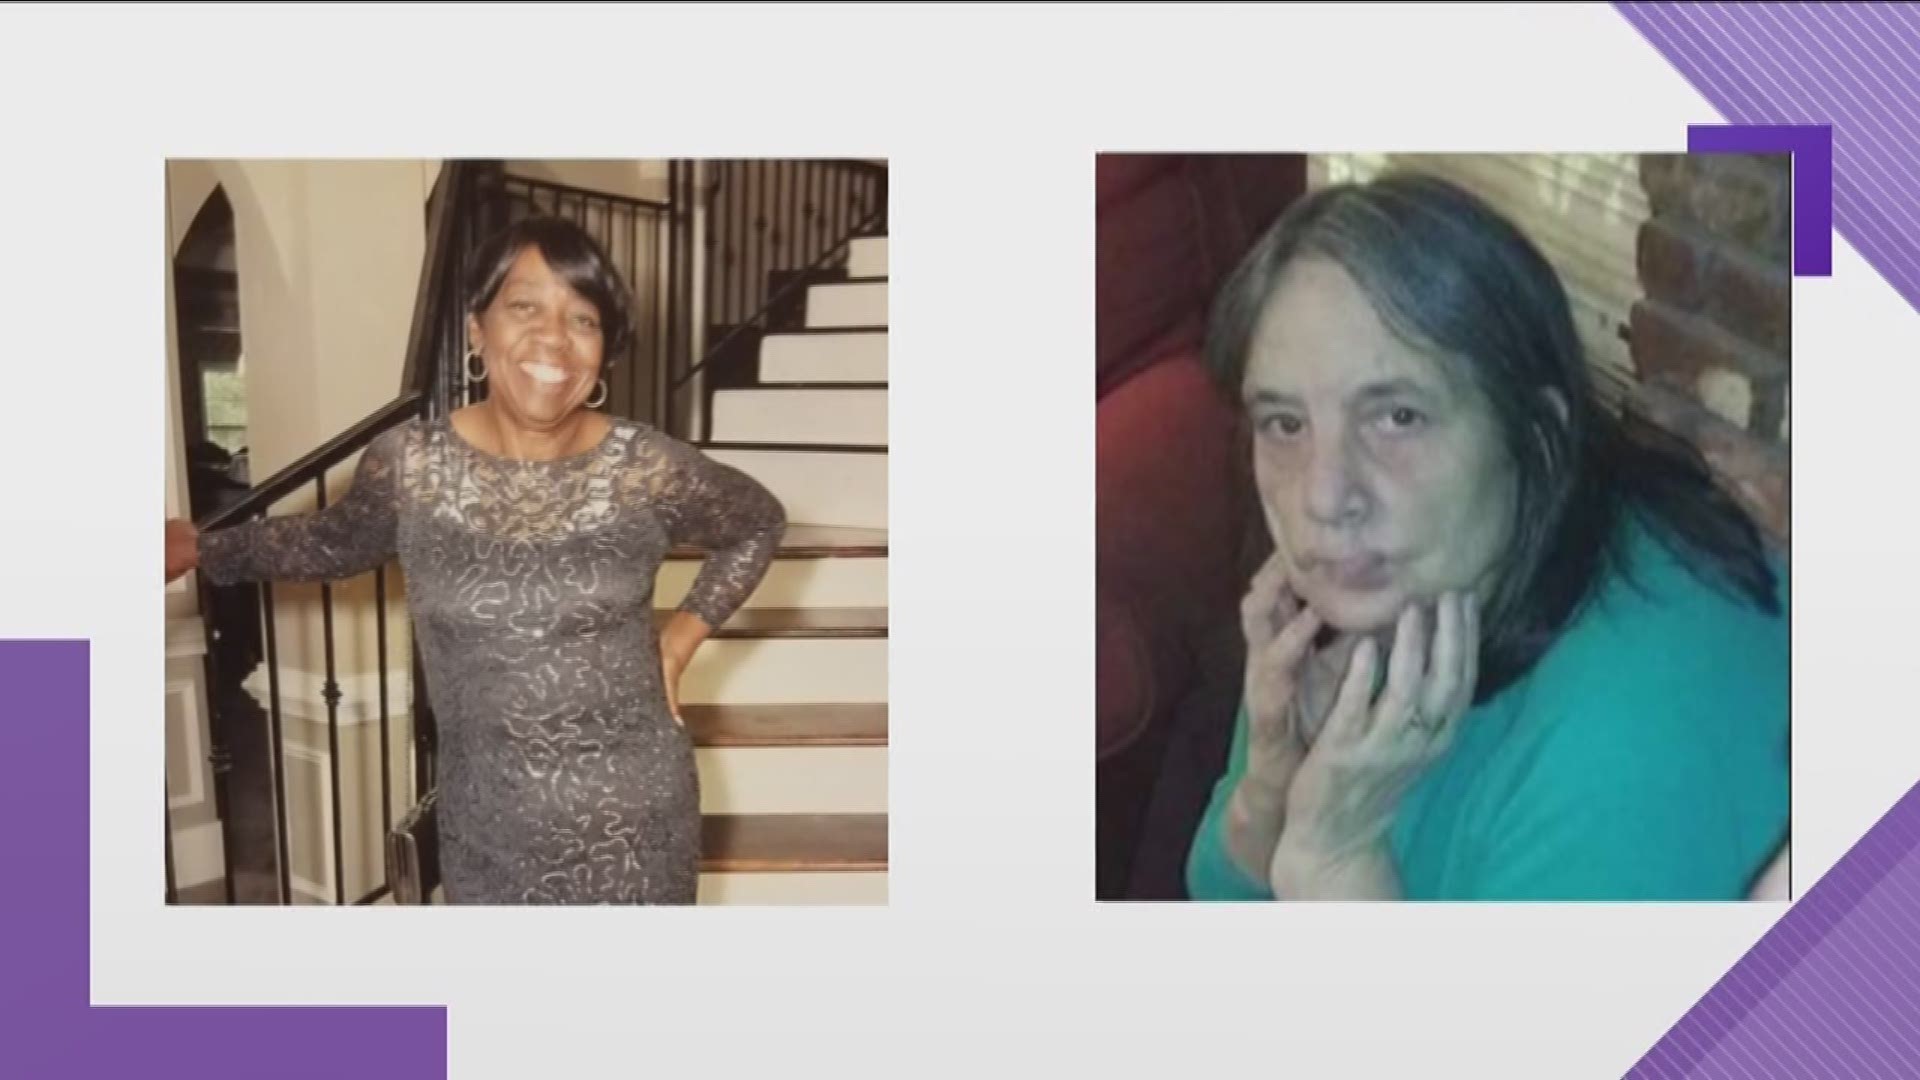 DeKalb police were called in to help find 71-year-old Maudine Phelps and 63-year-old Phoebe Jackson-Nemeth when the family reported that they left but never came home.